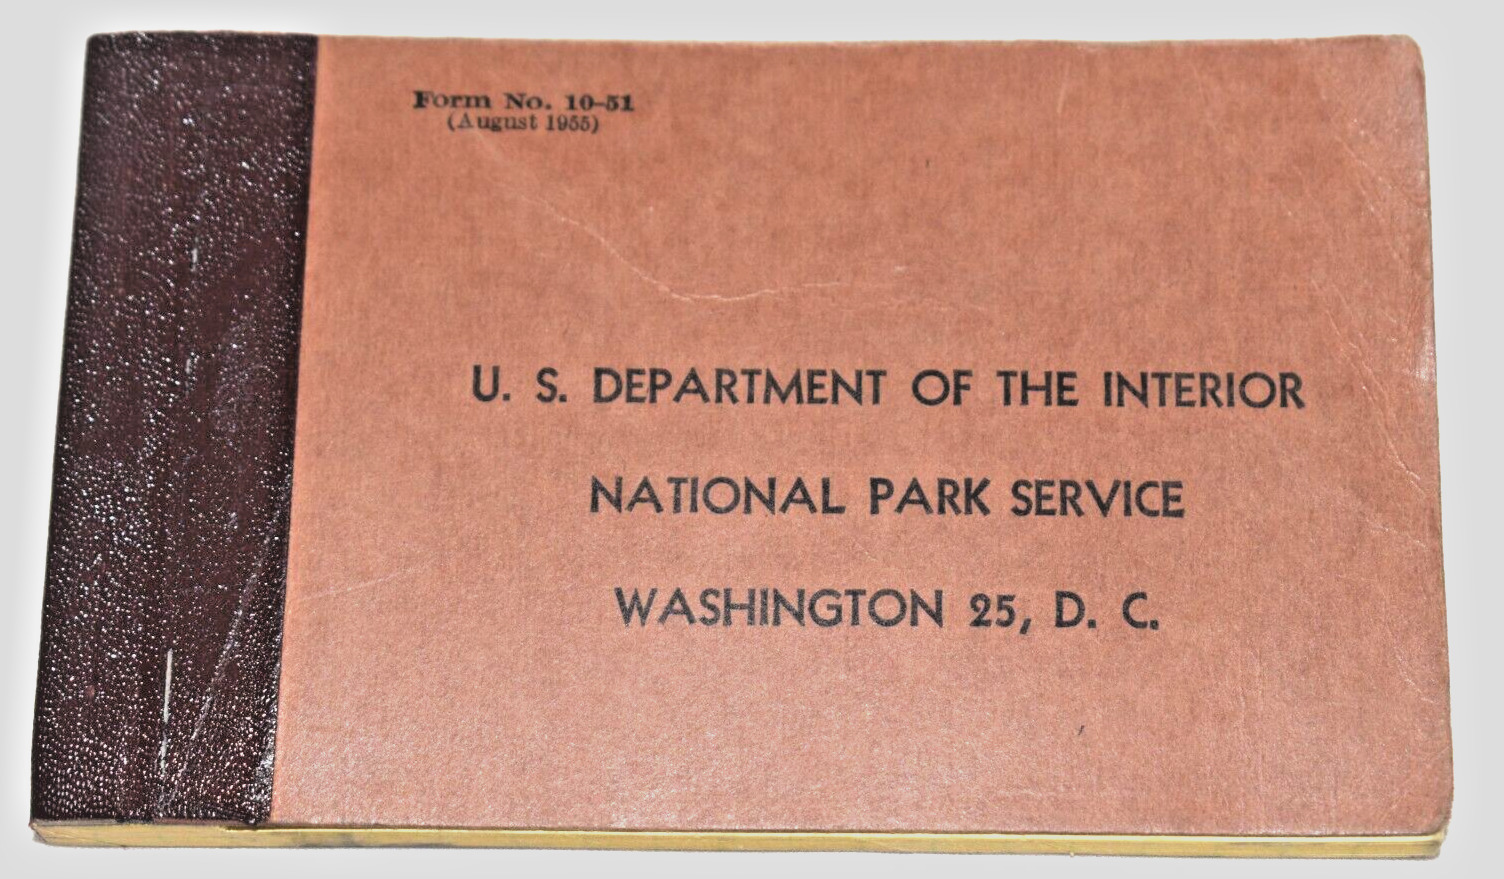 US DEPARTMENT OF INTERIOR August 1955 National Park Service Notepad Form 10-51